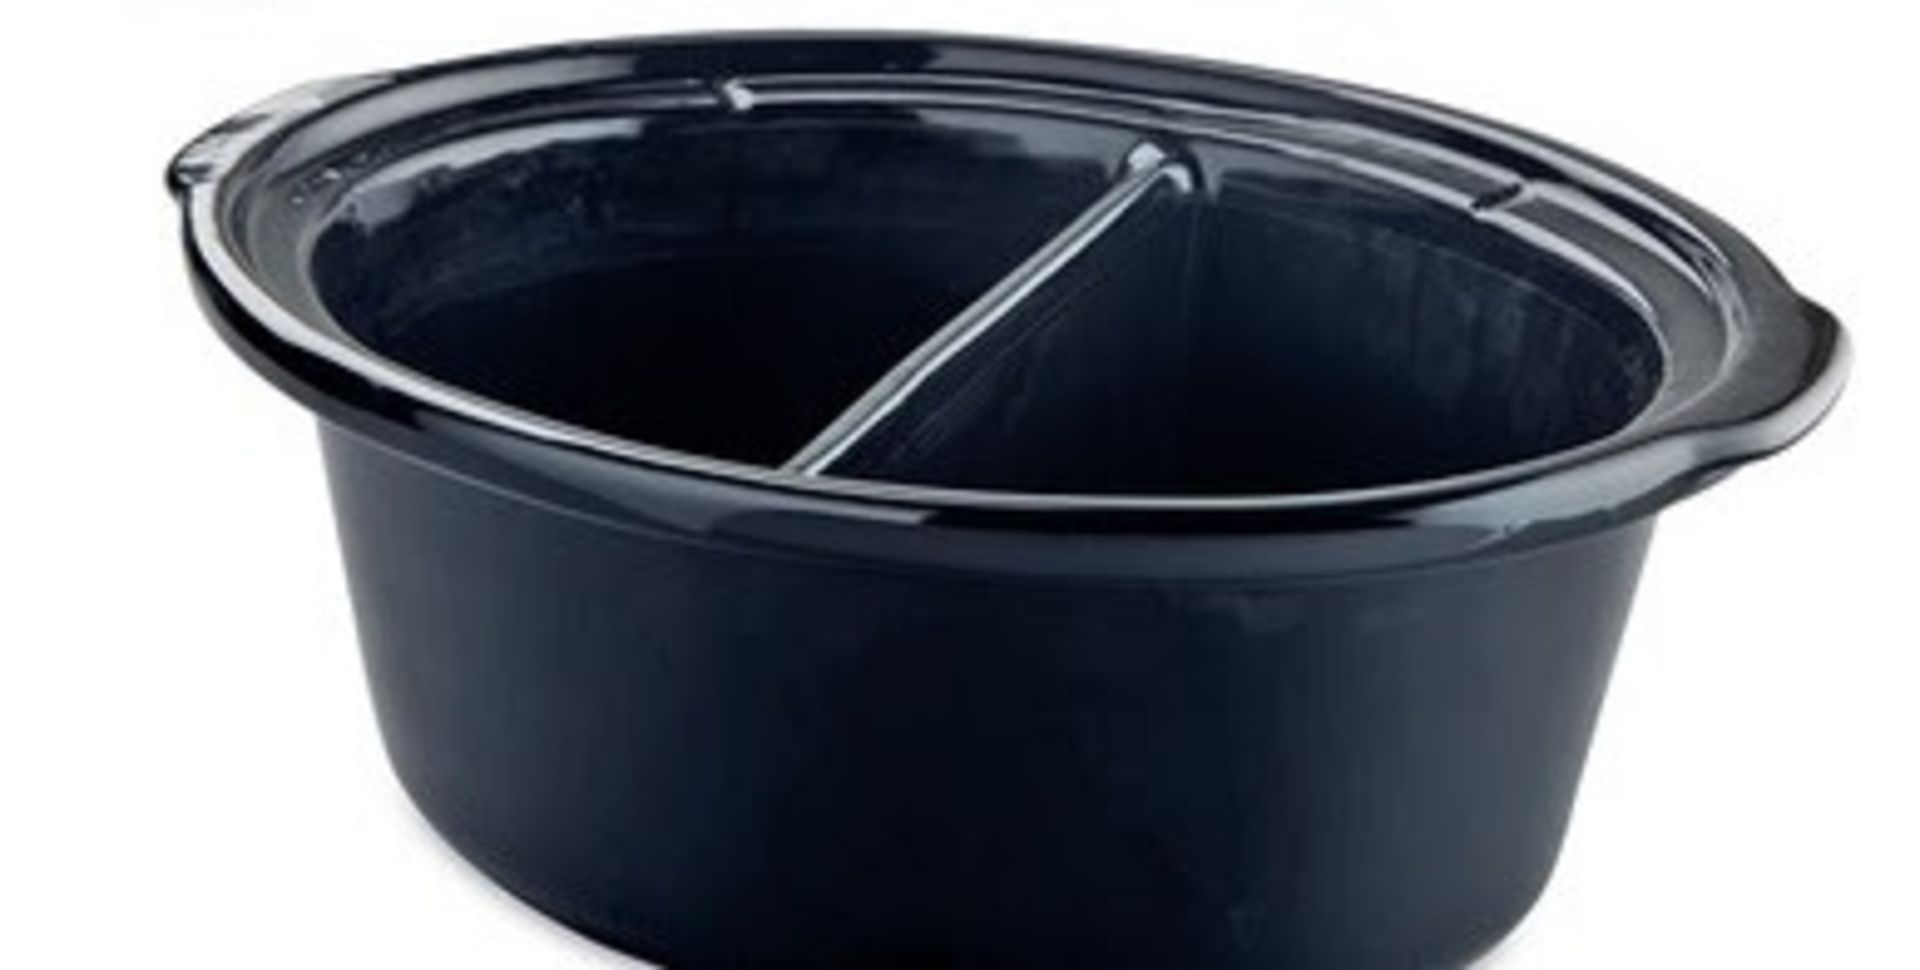 V Brand New Single Lakeland Slow Cooker POT With 2 Sections To Allow Cooking 2 Recipes At Once -